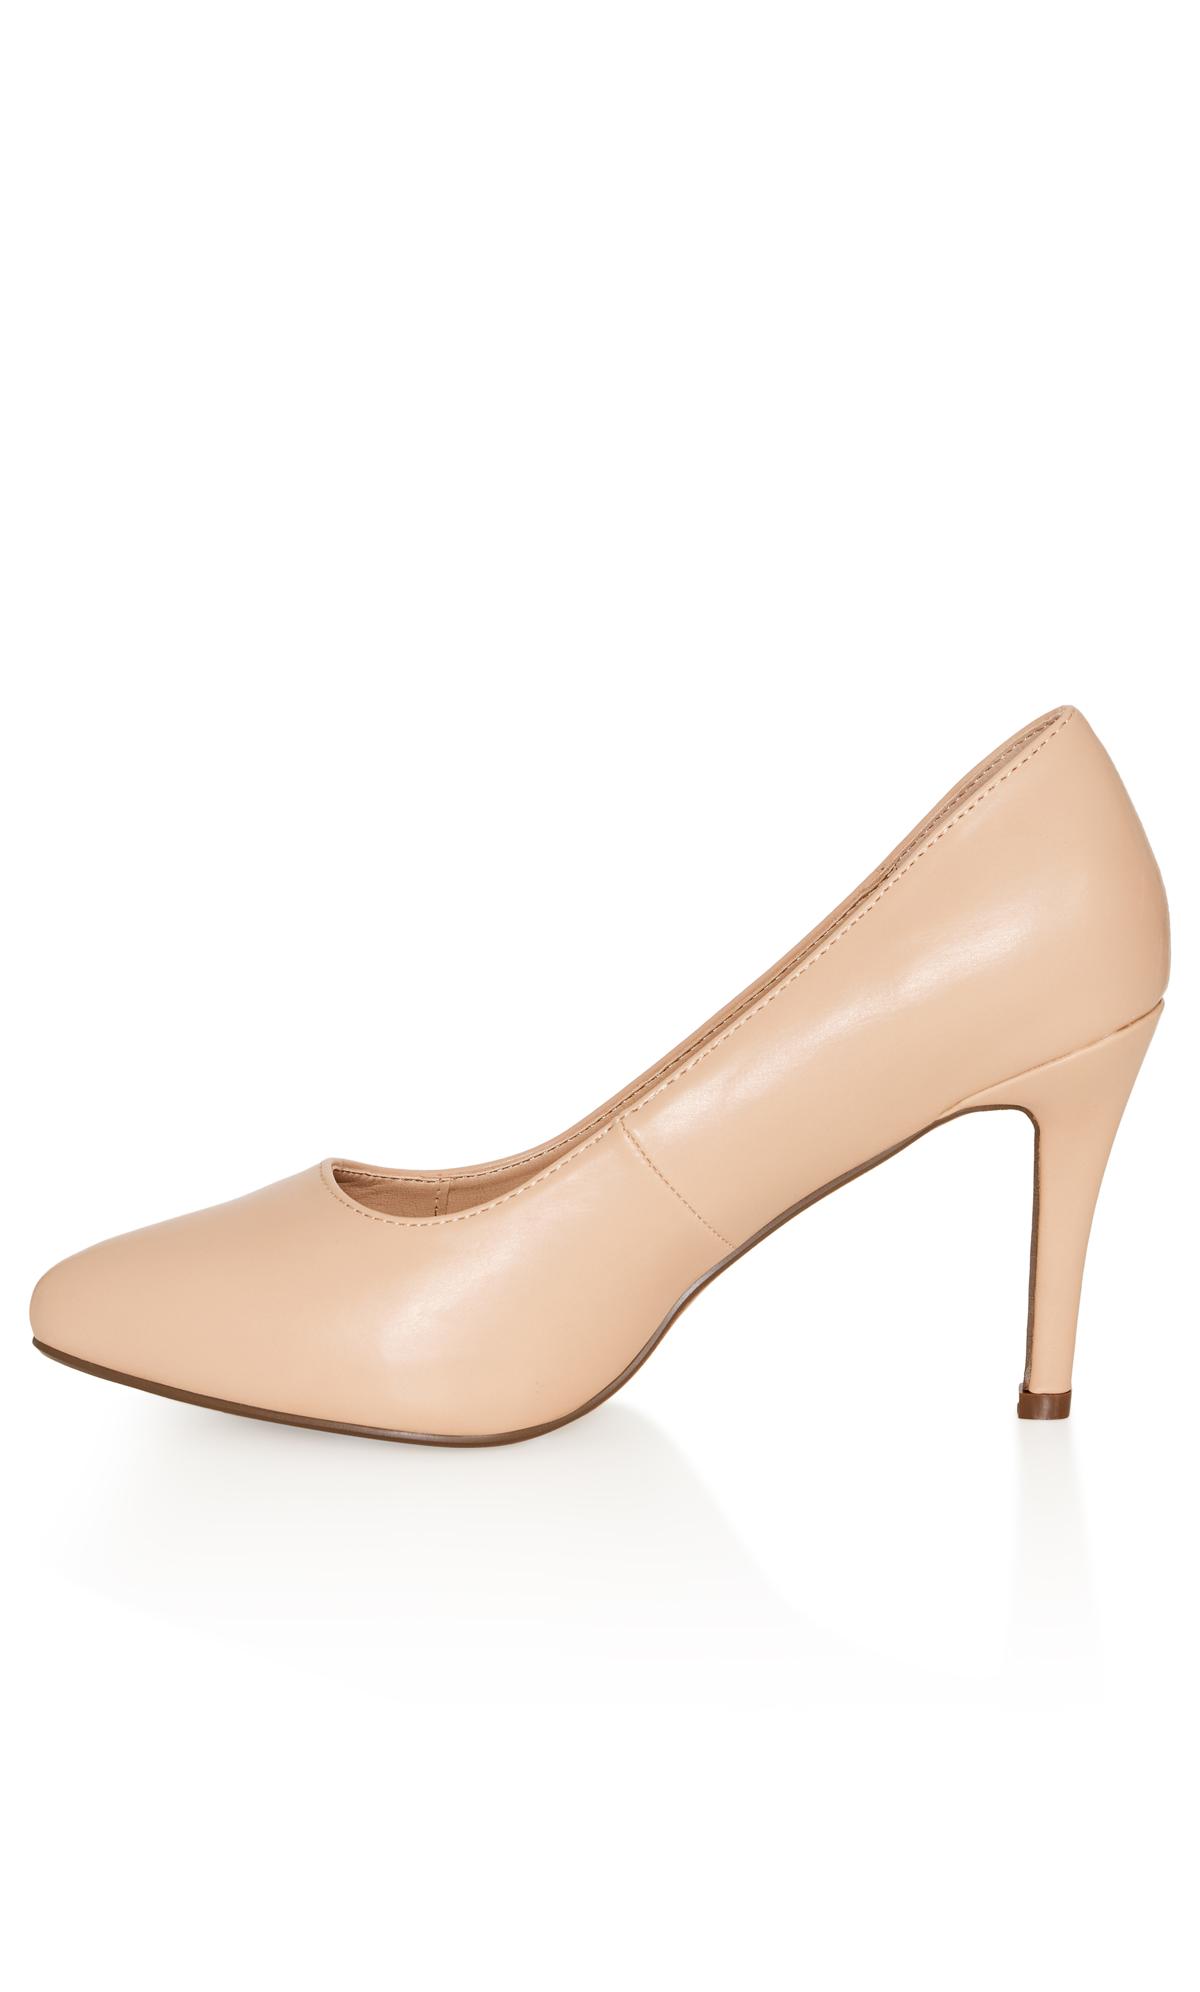 City Chic WIDE FIT Nude Court Heels 3